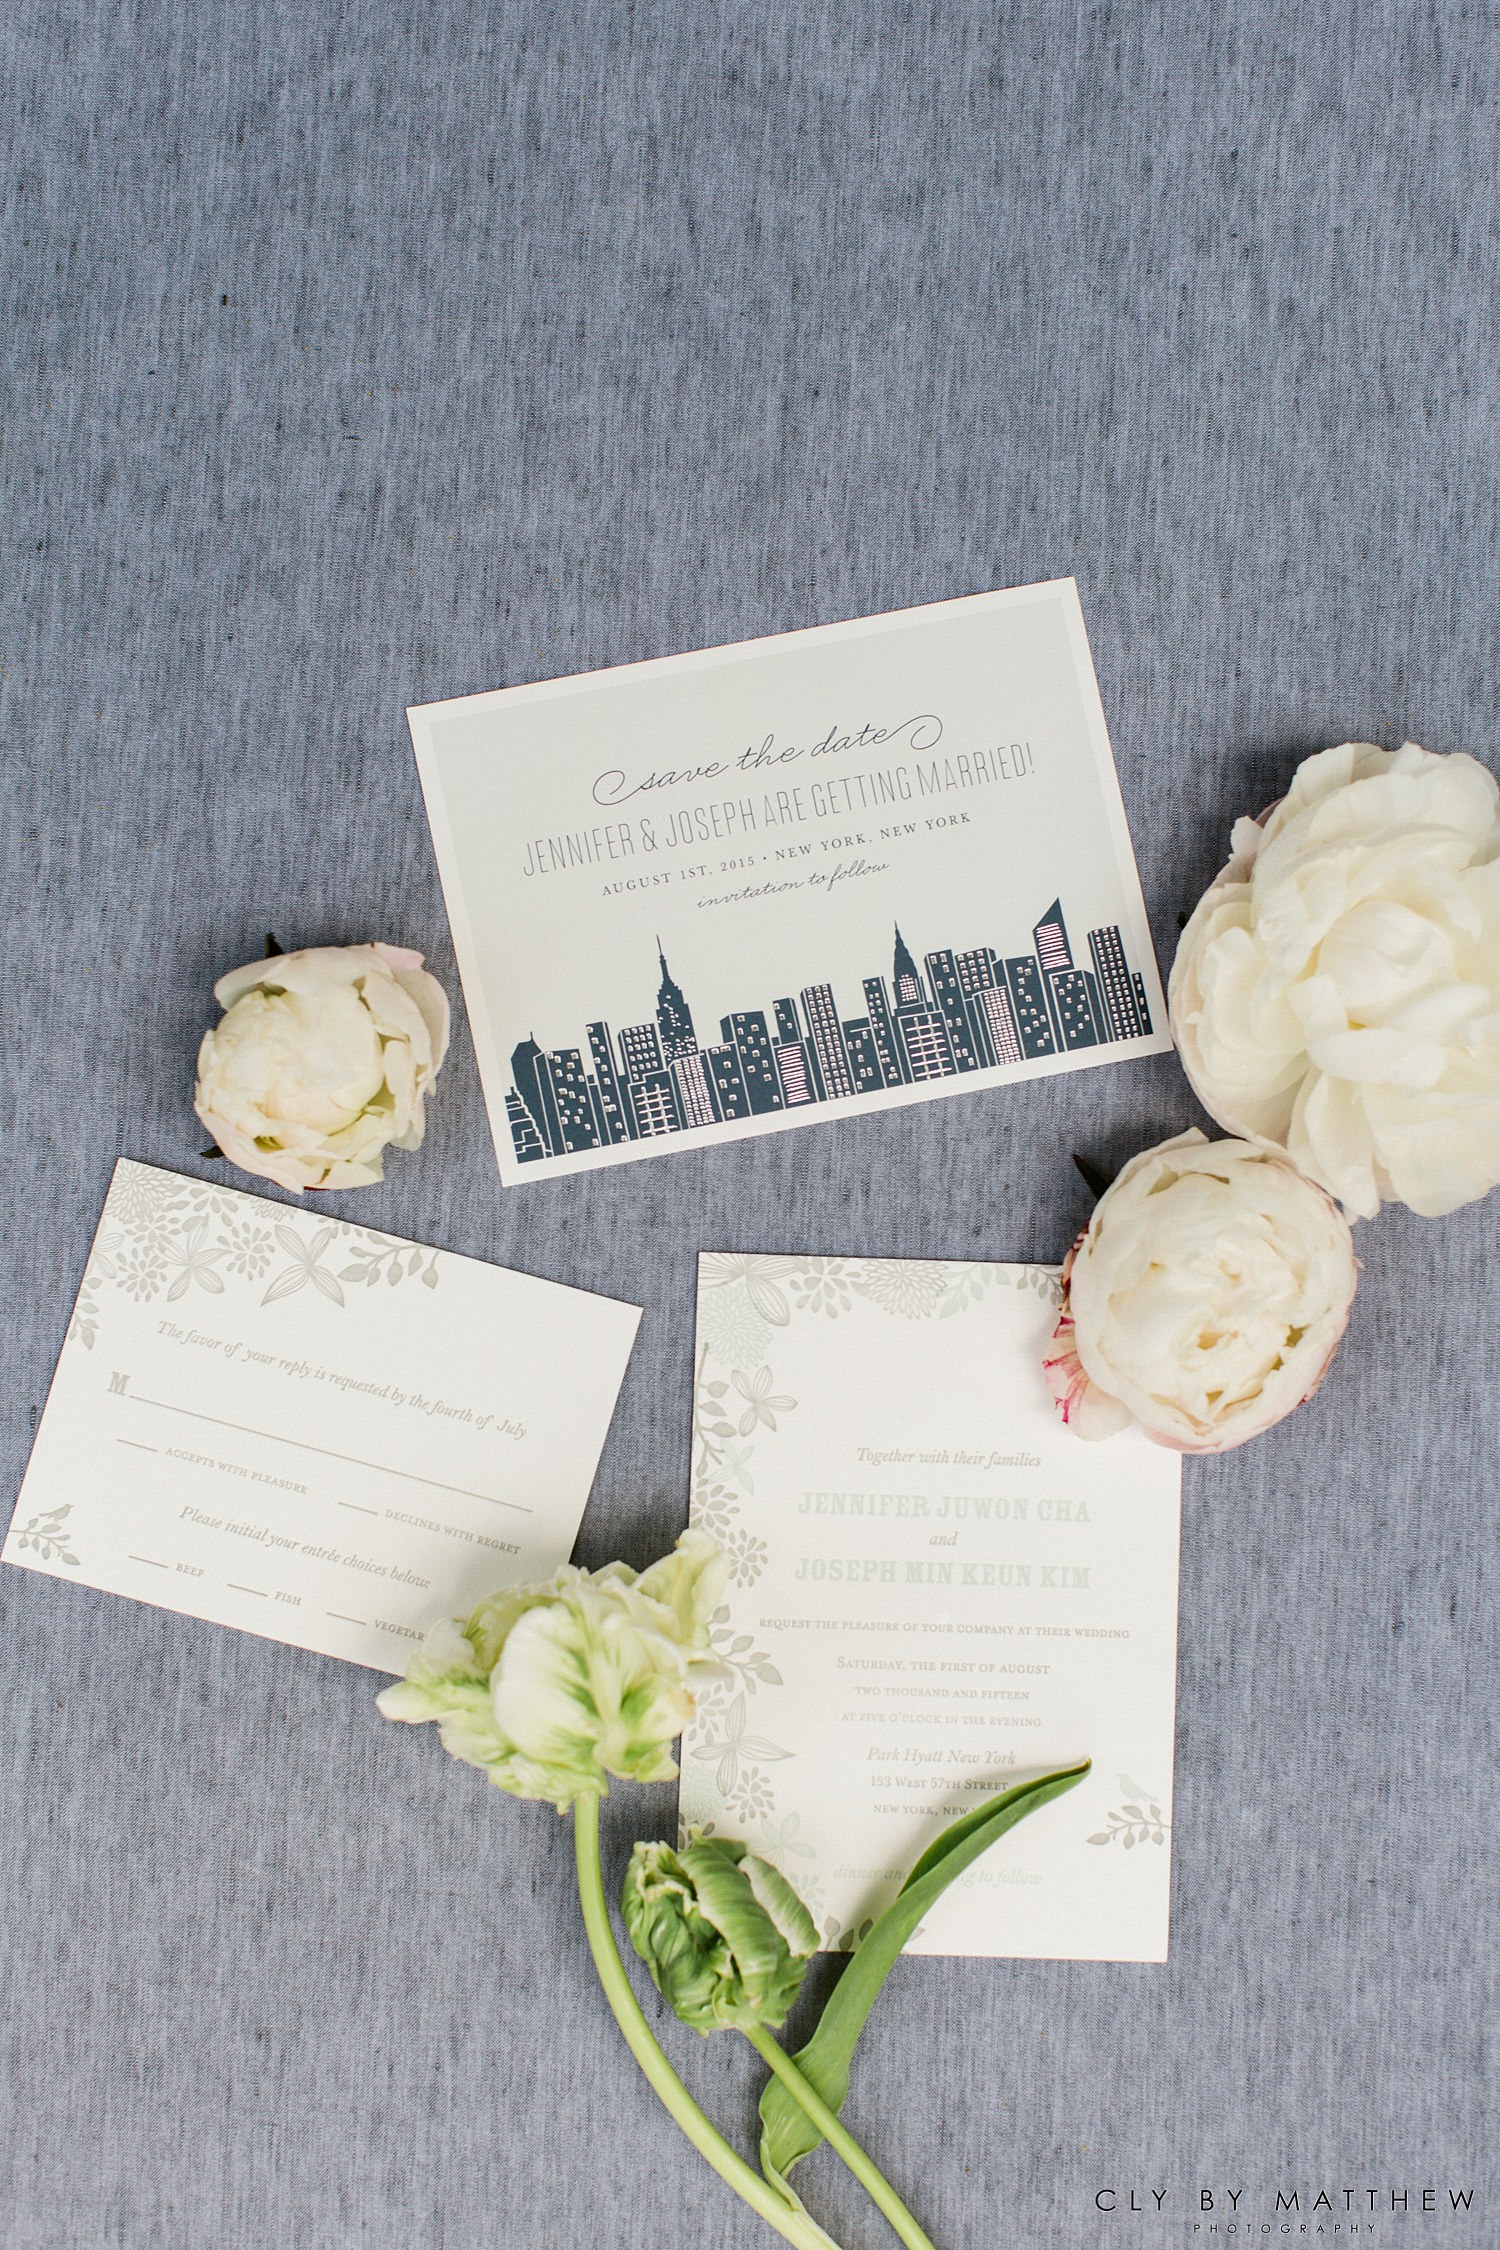 New york city themed wedding invitations for a wedding at the Park Hyatt Hotel in NYC